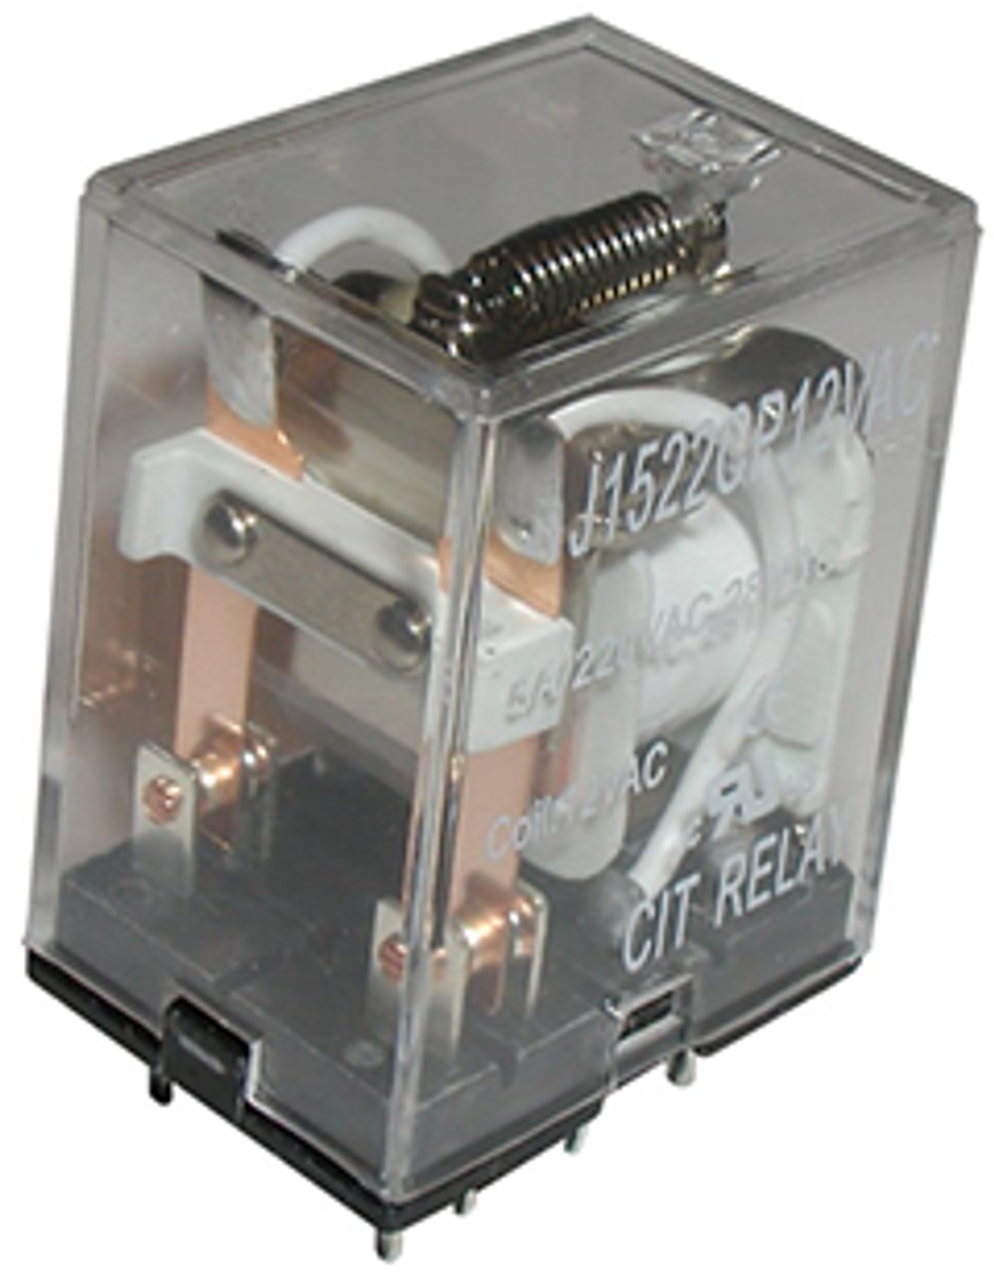 CIT Relay and Switch J1522CP110VDCT Industrial Relays